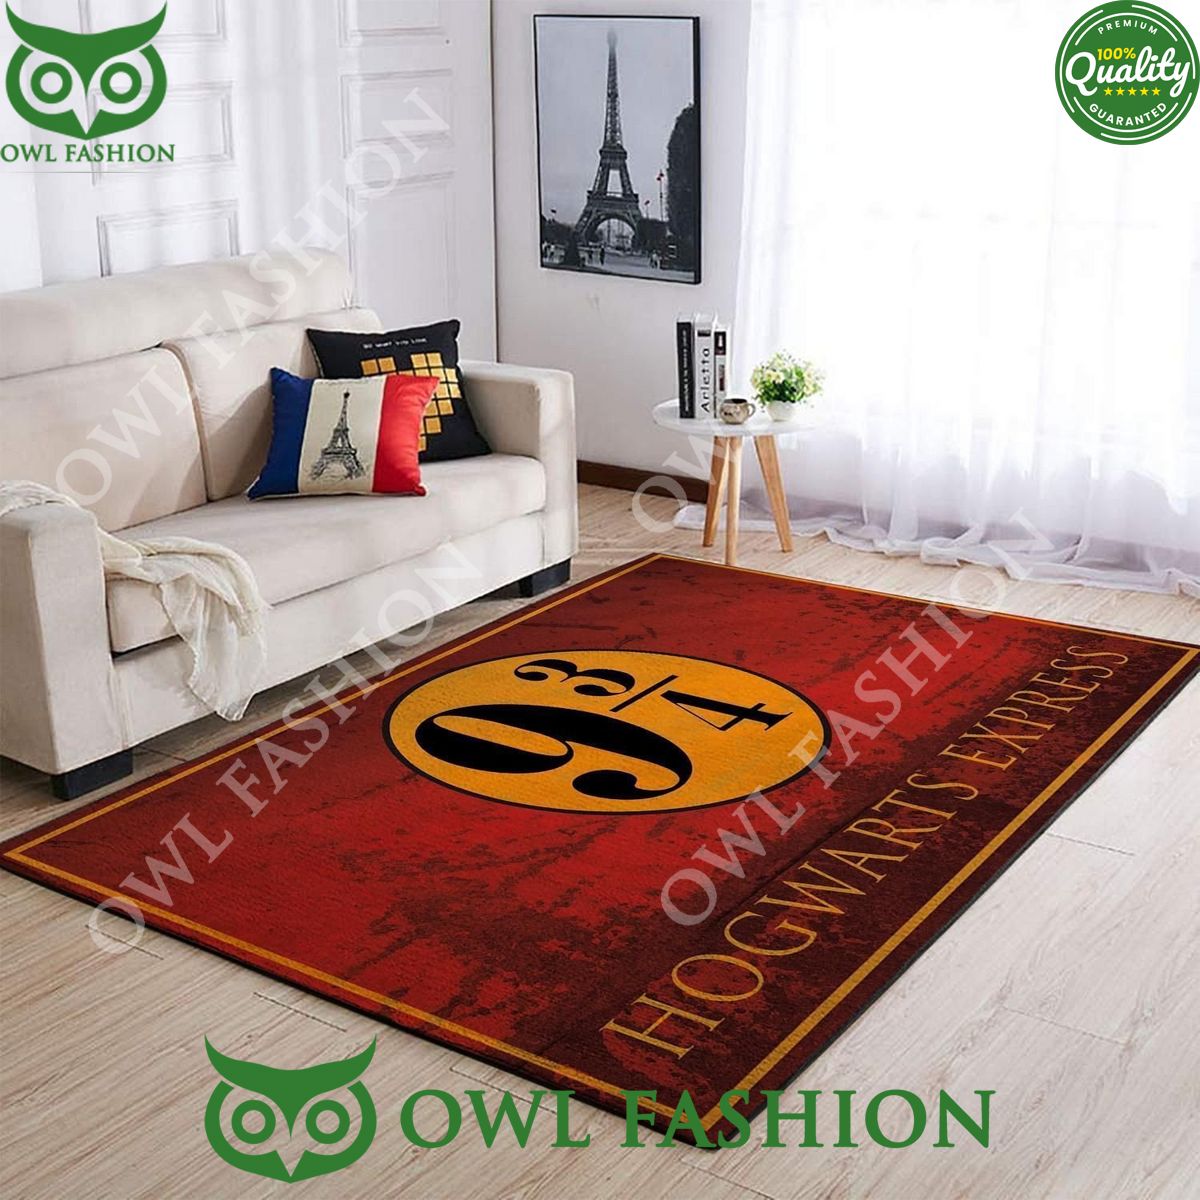 Hogwarts Express Harry Potter Carpet Rug You look different and cute